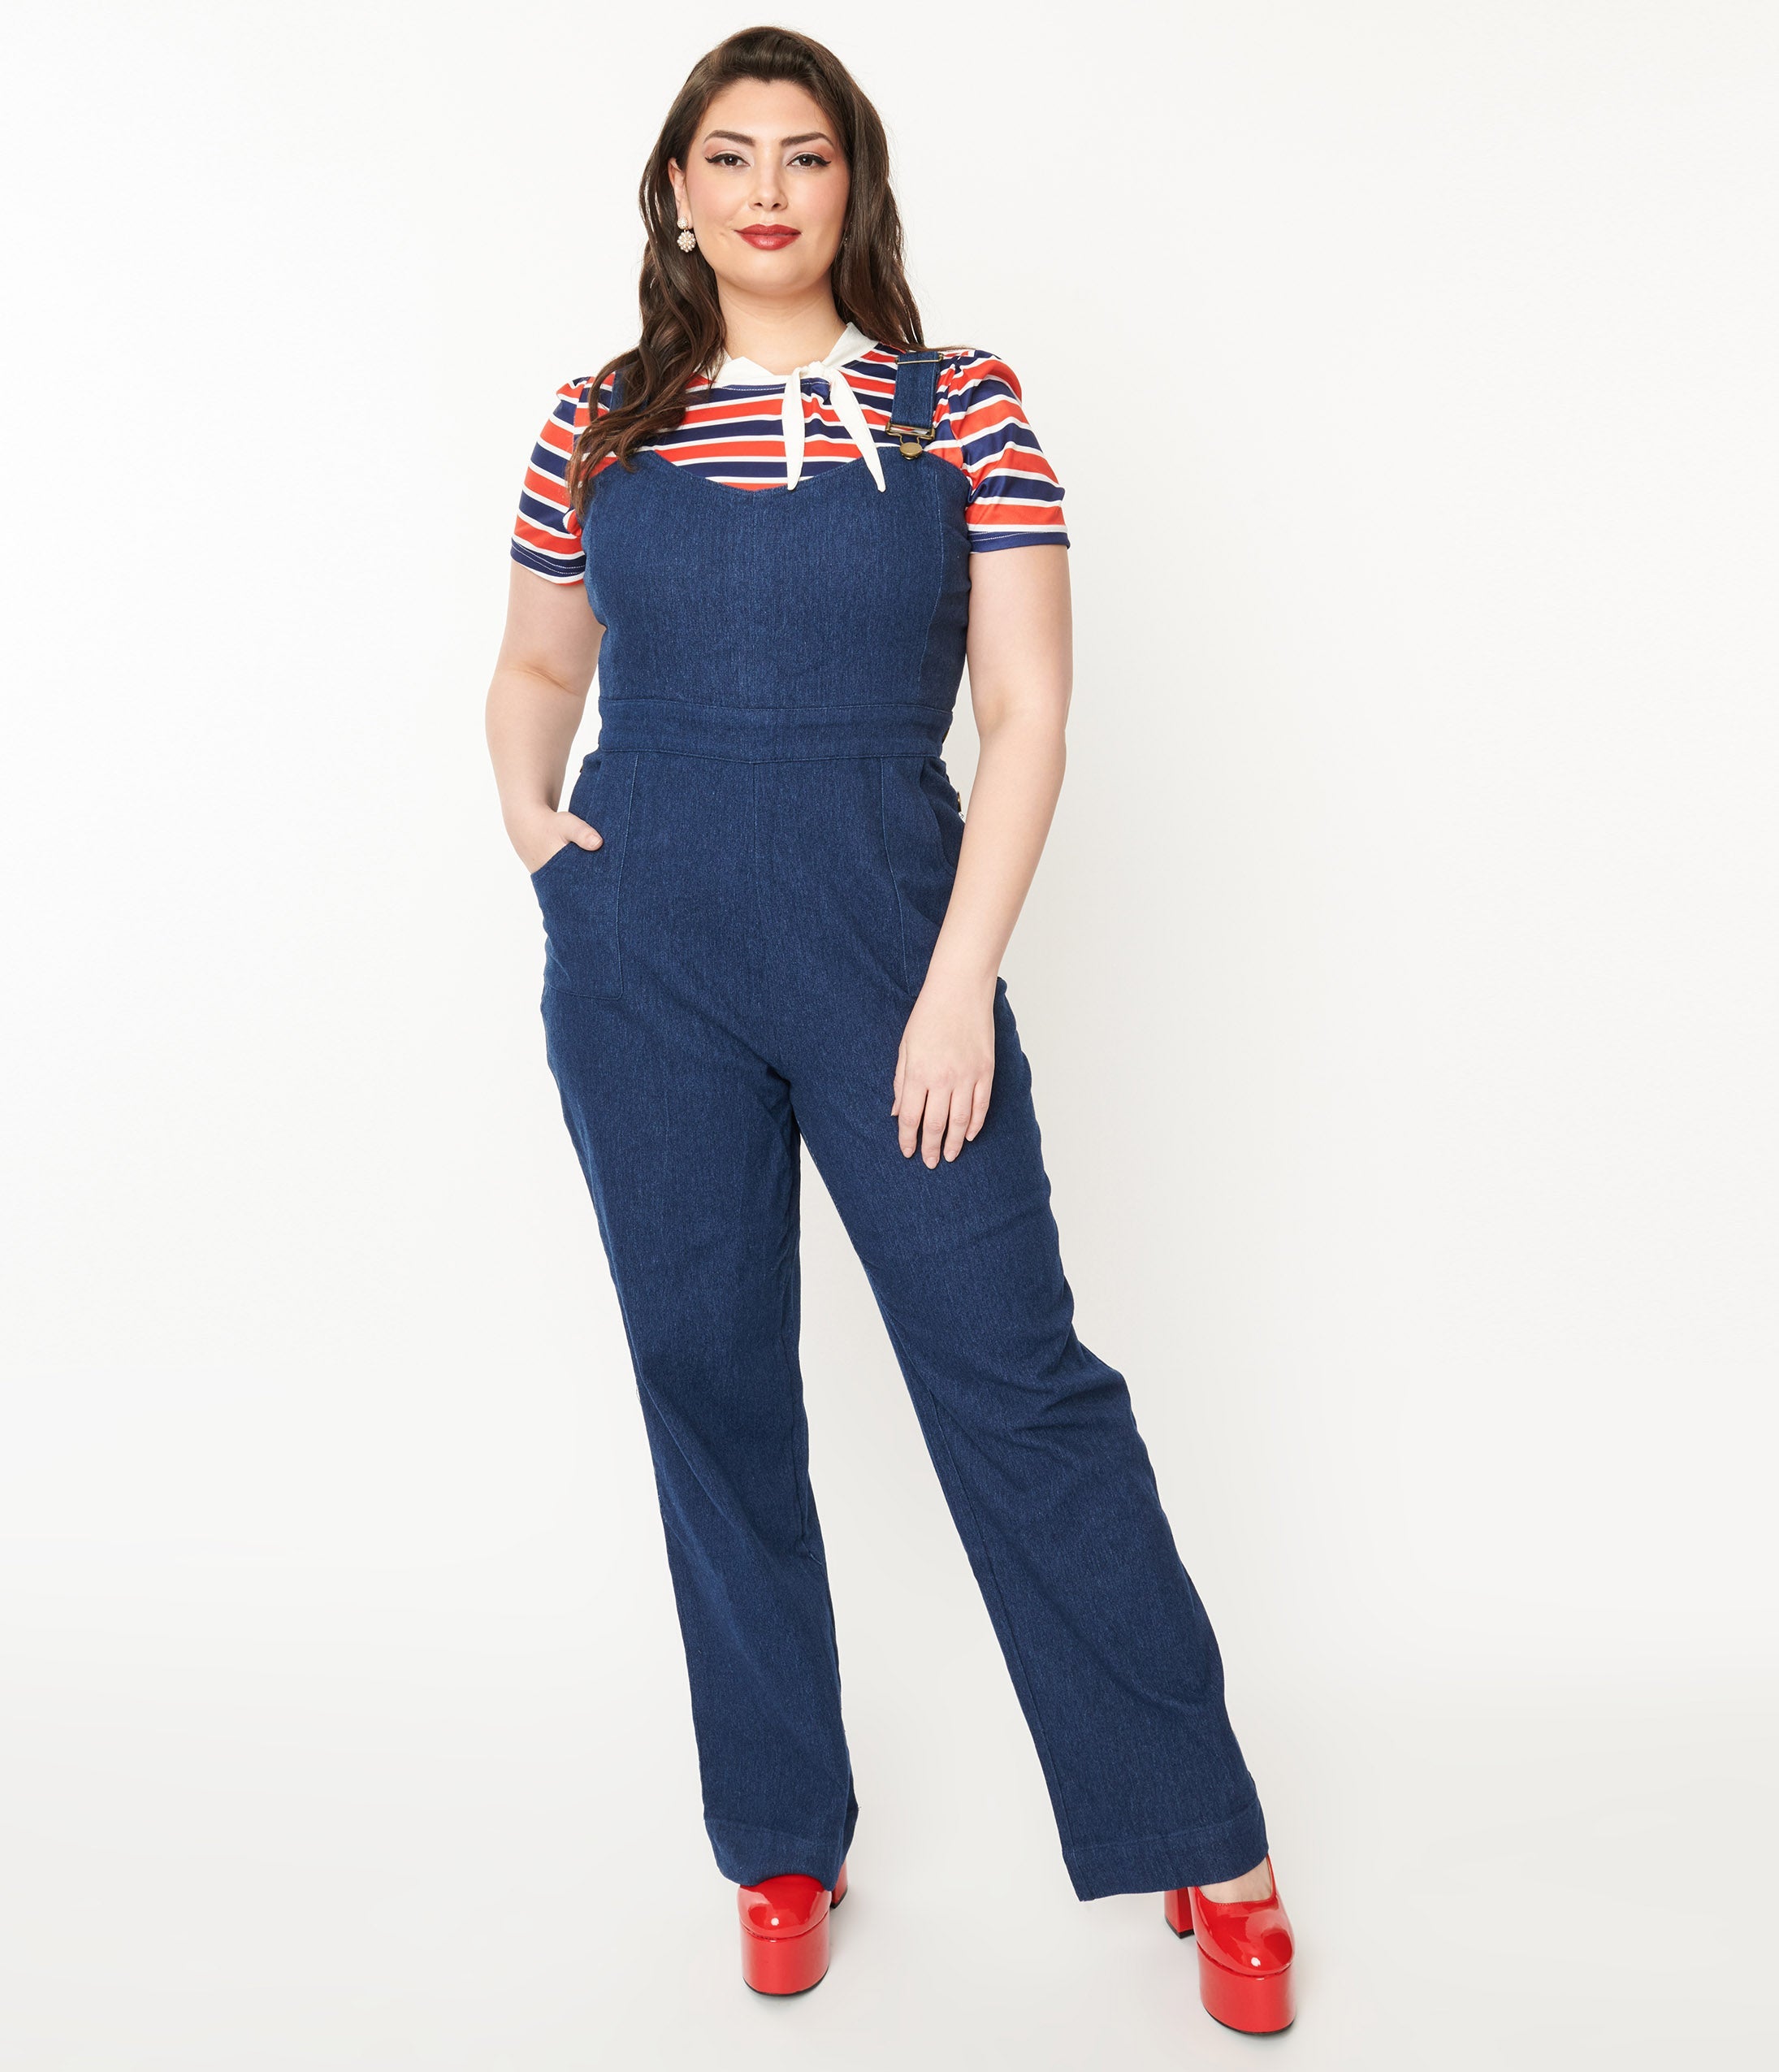  Retro Skinny Jeans for Women High Waist Flare Pants Suspender  Pants Denim Overalls,L : Clothing, Shoes & Jewelry